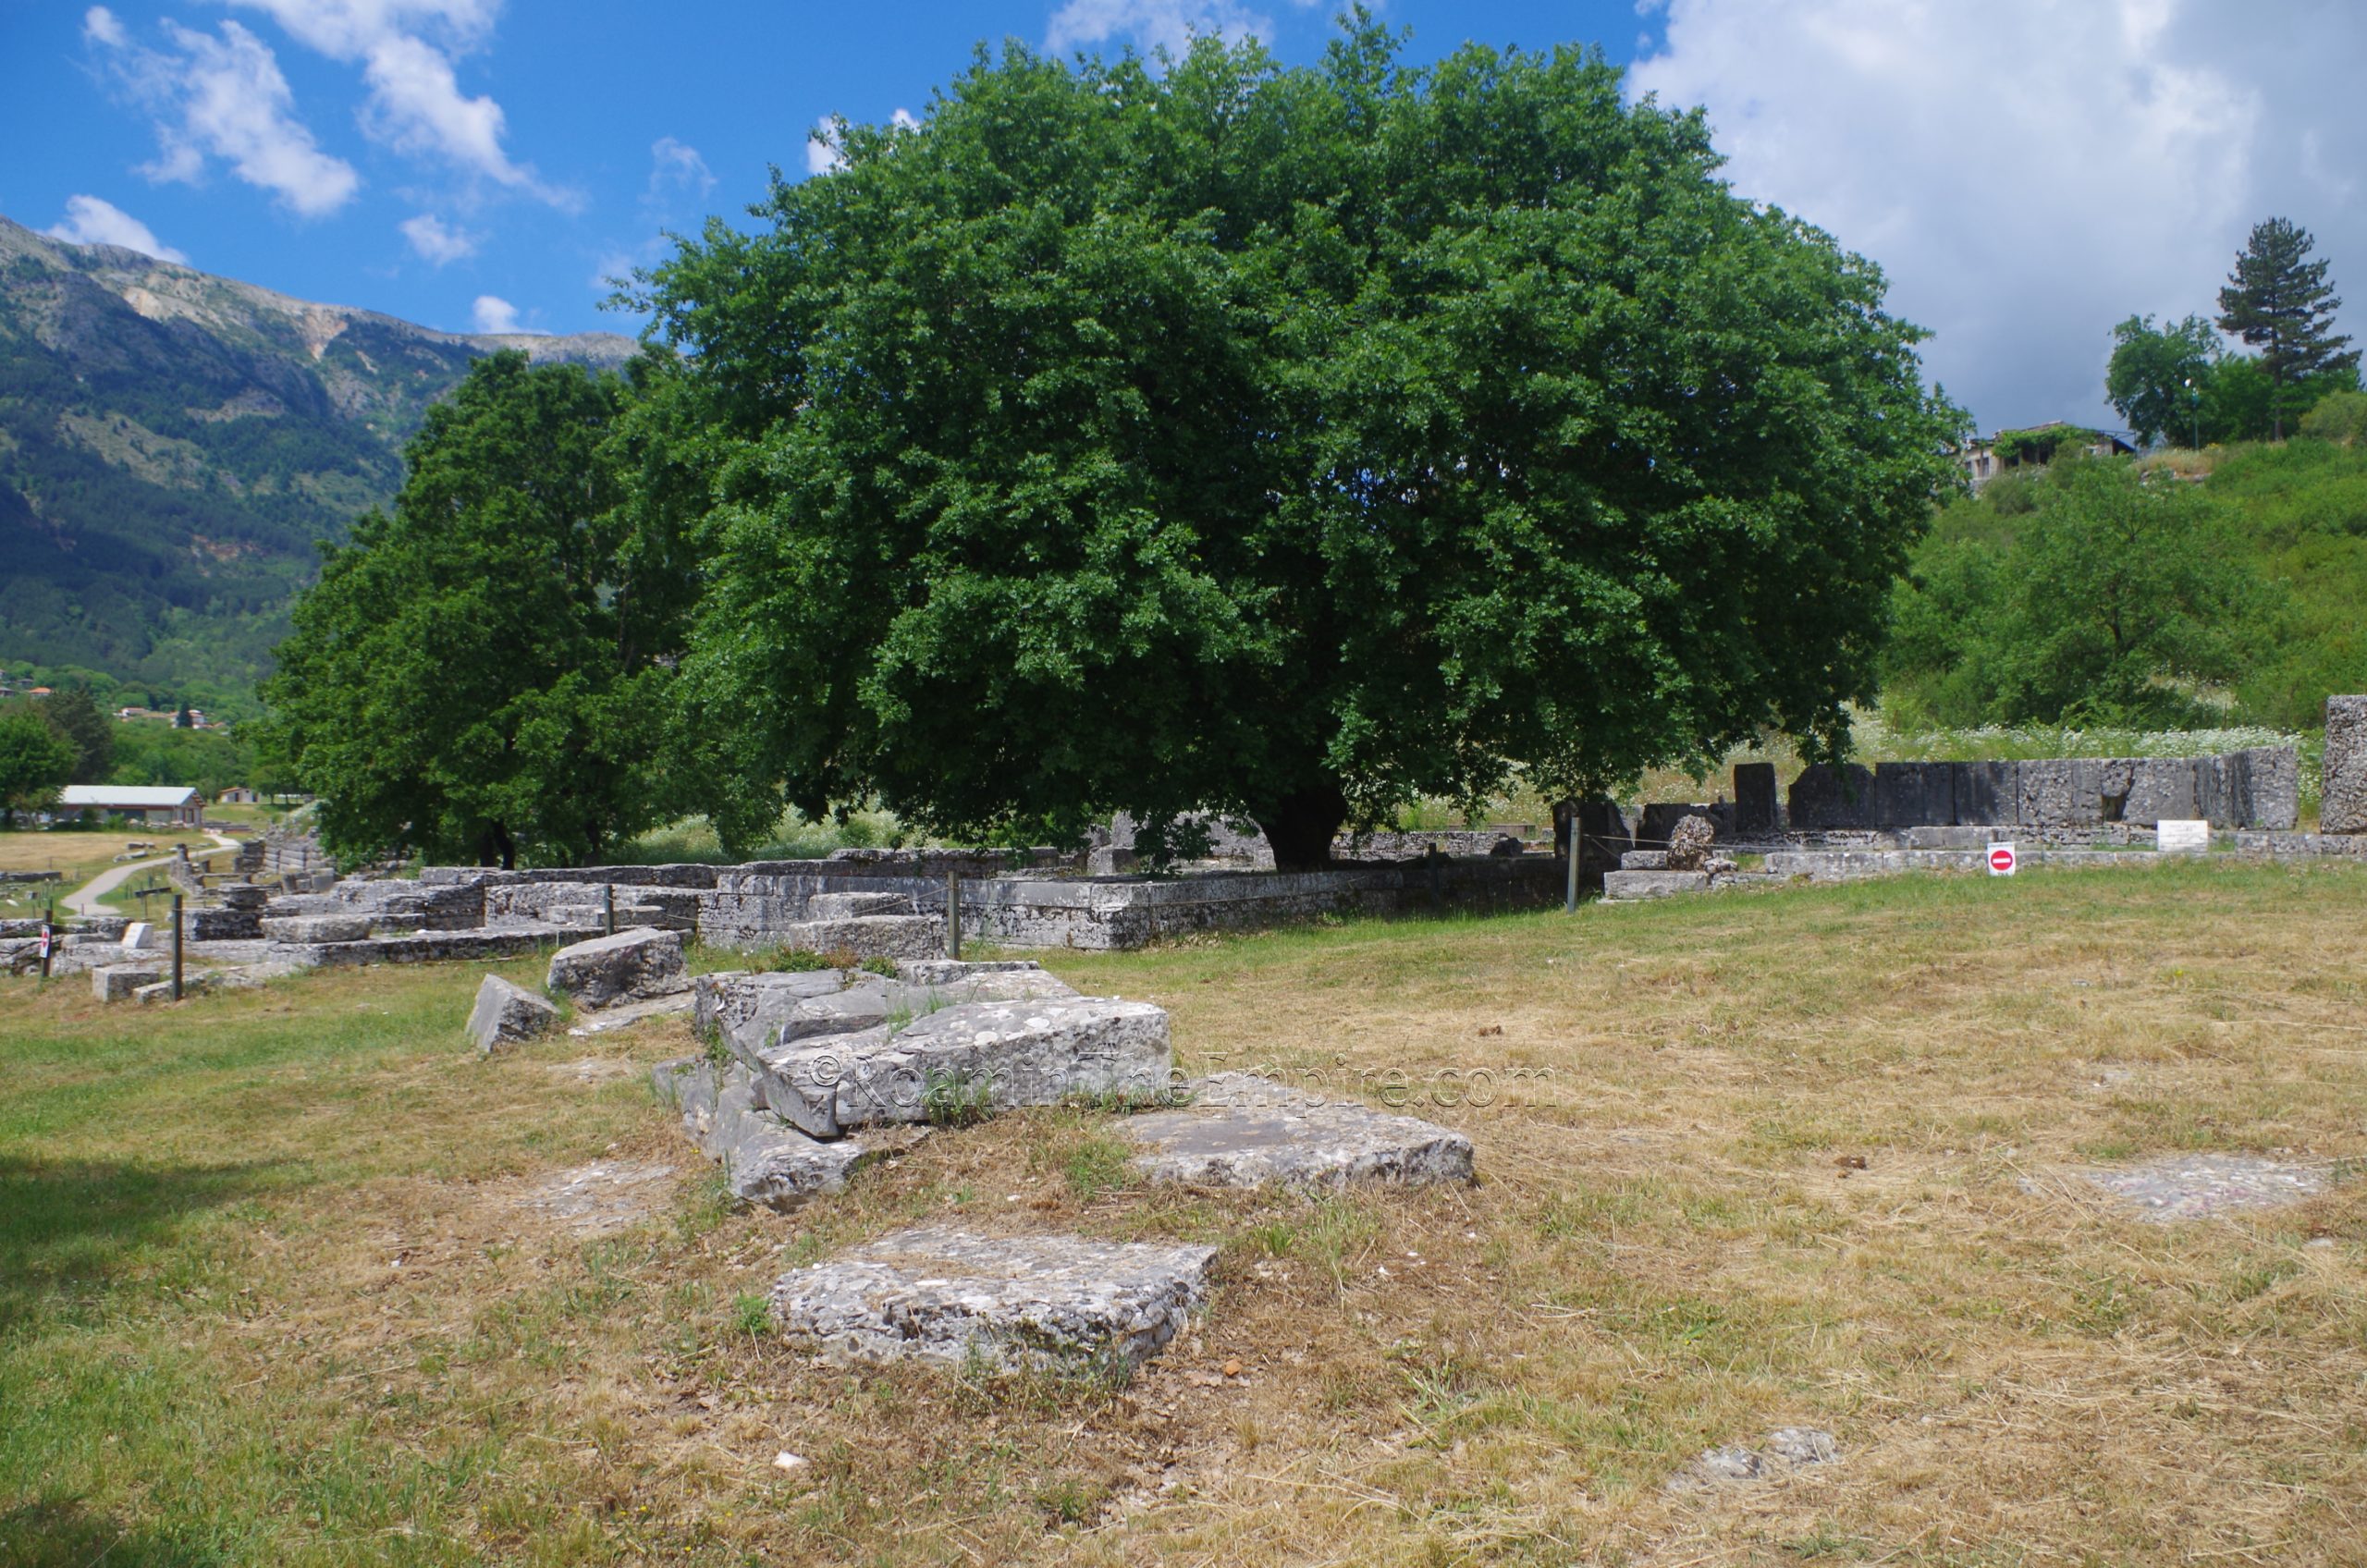 Hiera Oikia of Zeus, the core of the sanctuary and location of the sacred grove.